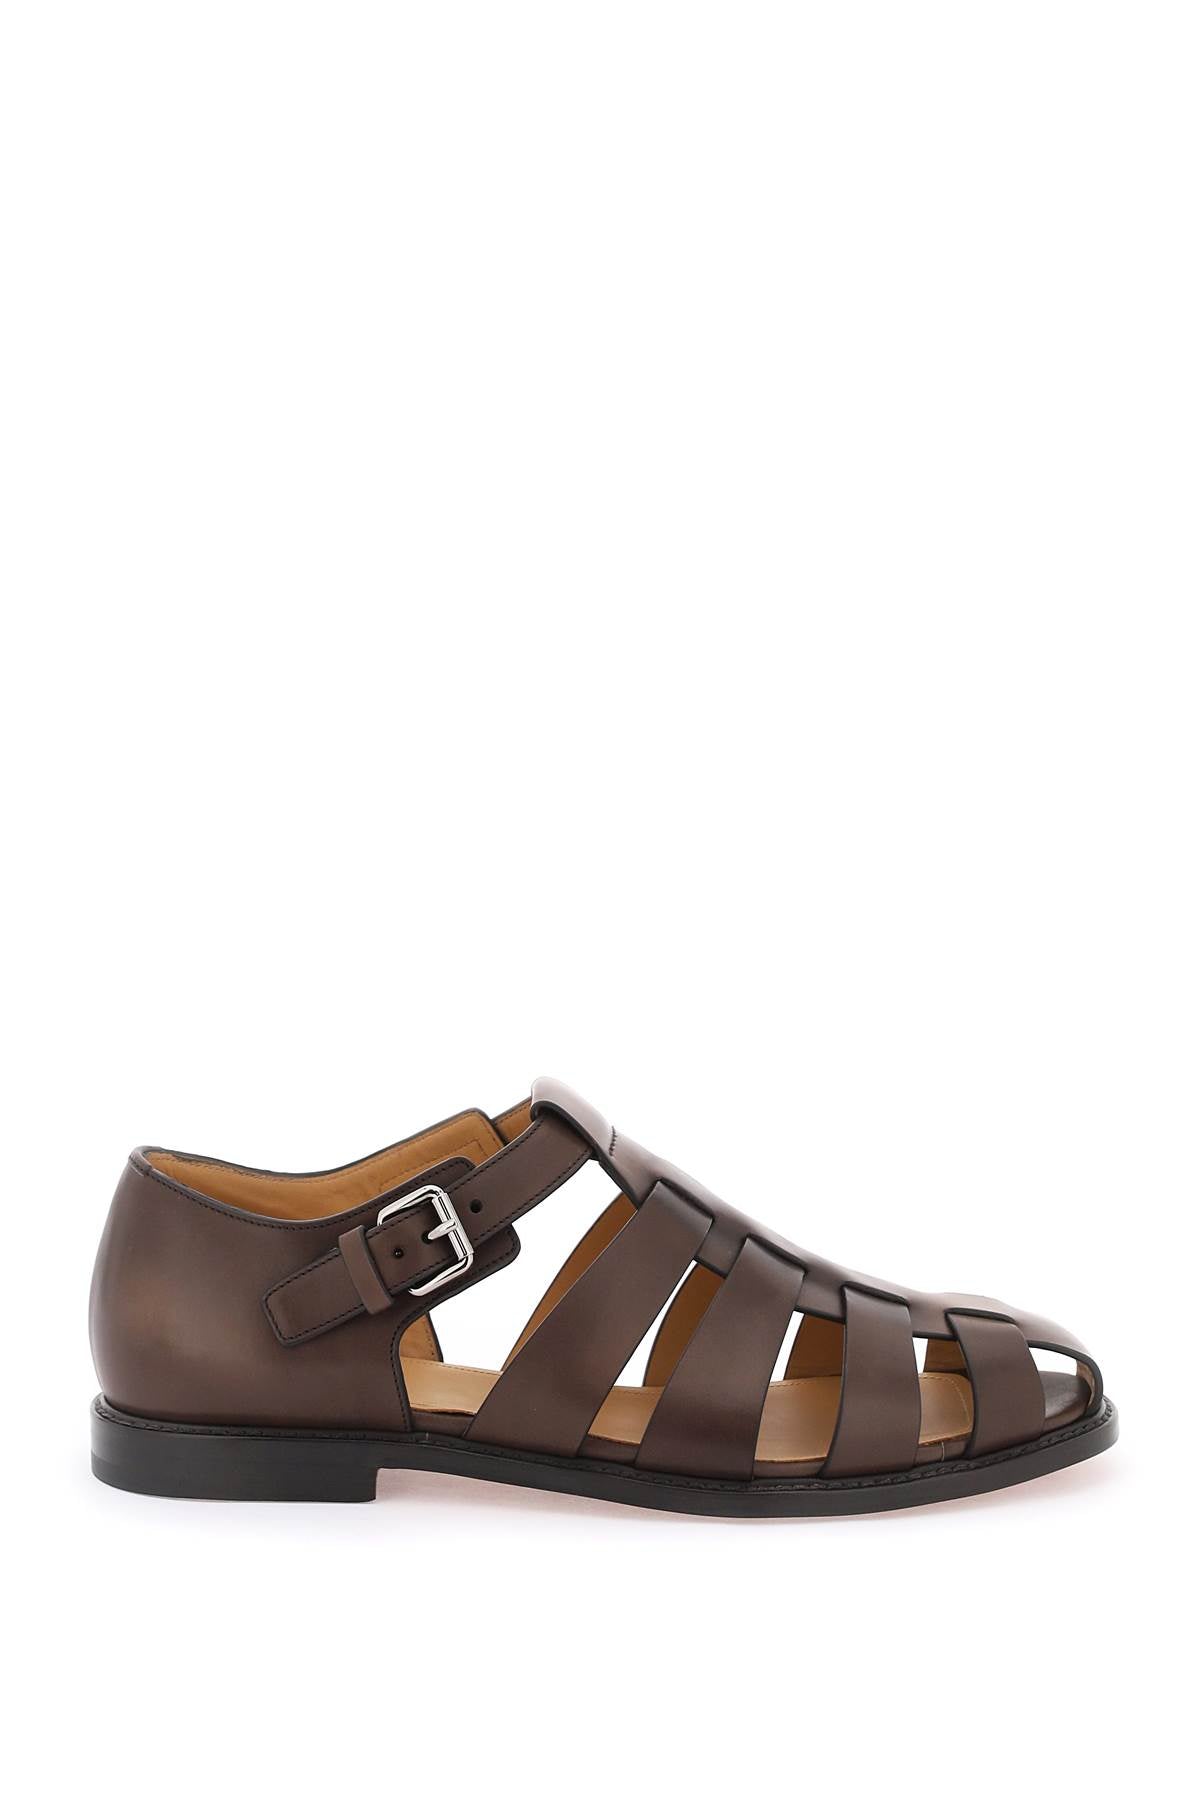 Shop Church's Rugged Brown Leather Fisherman Sandals For Men